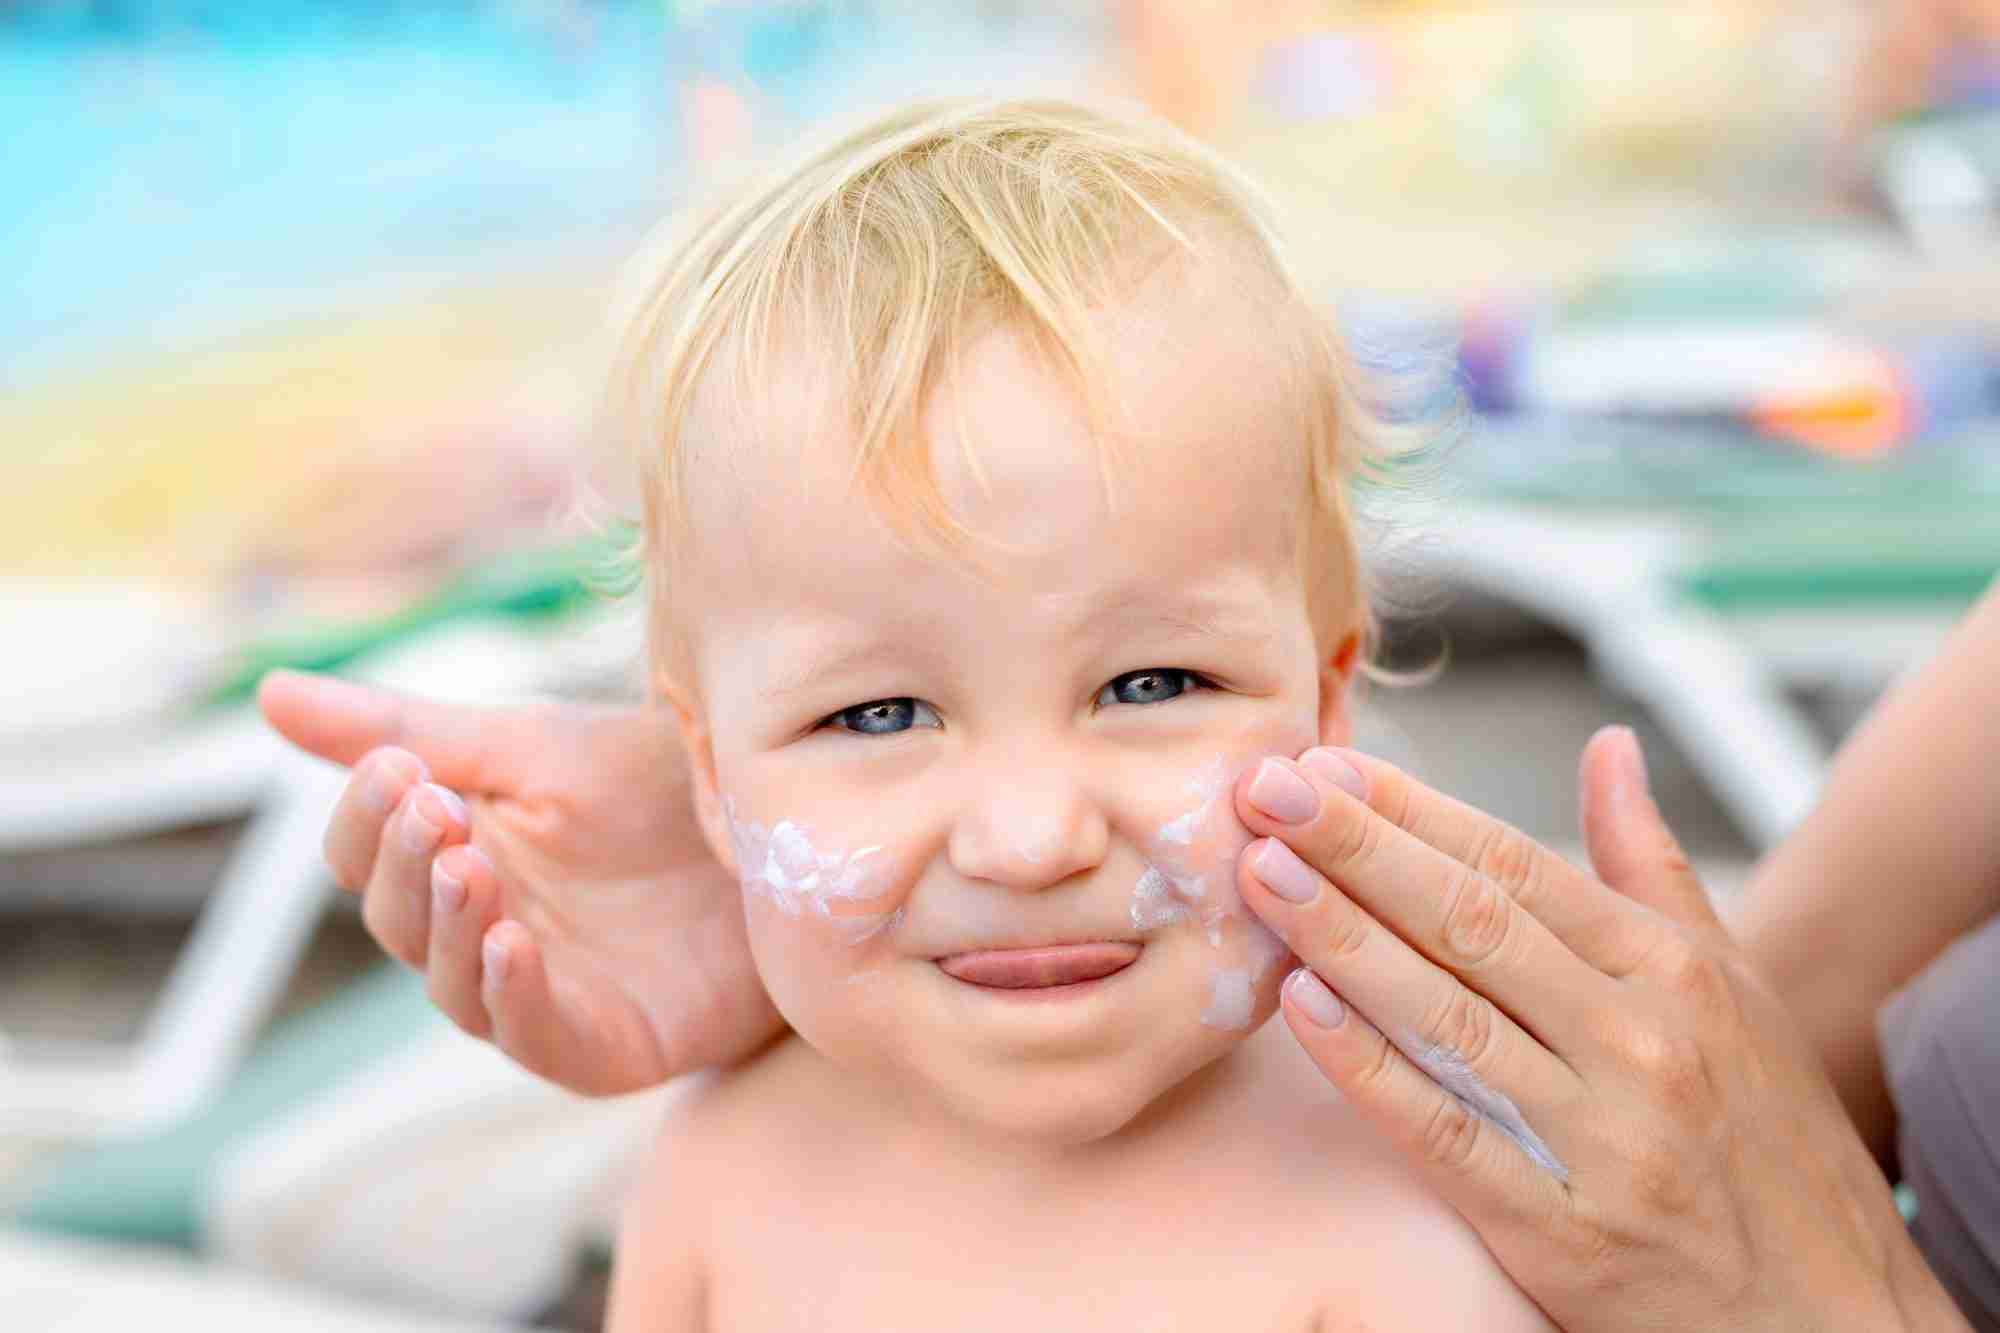 which cosmetic products are safe to use for my child